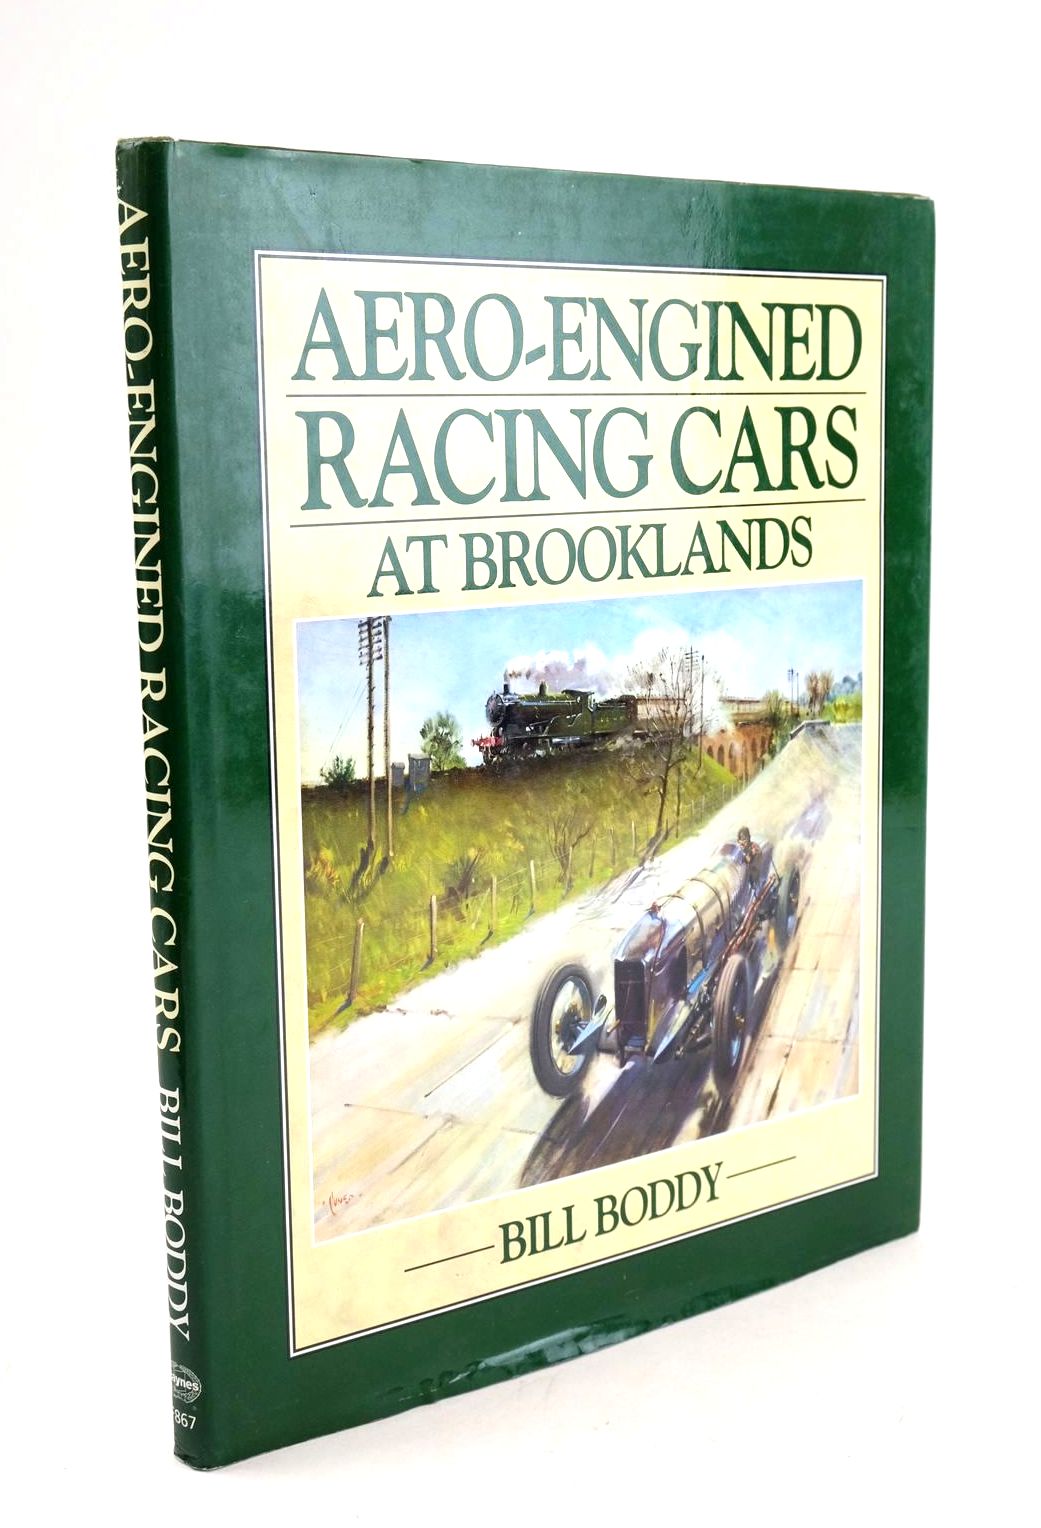 Photo of AERO-ENGINED RACING CARS AT BROOKLANDS written by Boddy, Bill published by Haynes Publishing Group (STOCK CODE: 1325087)  for sale by Stella & Rose's Books